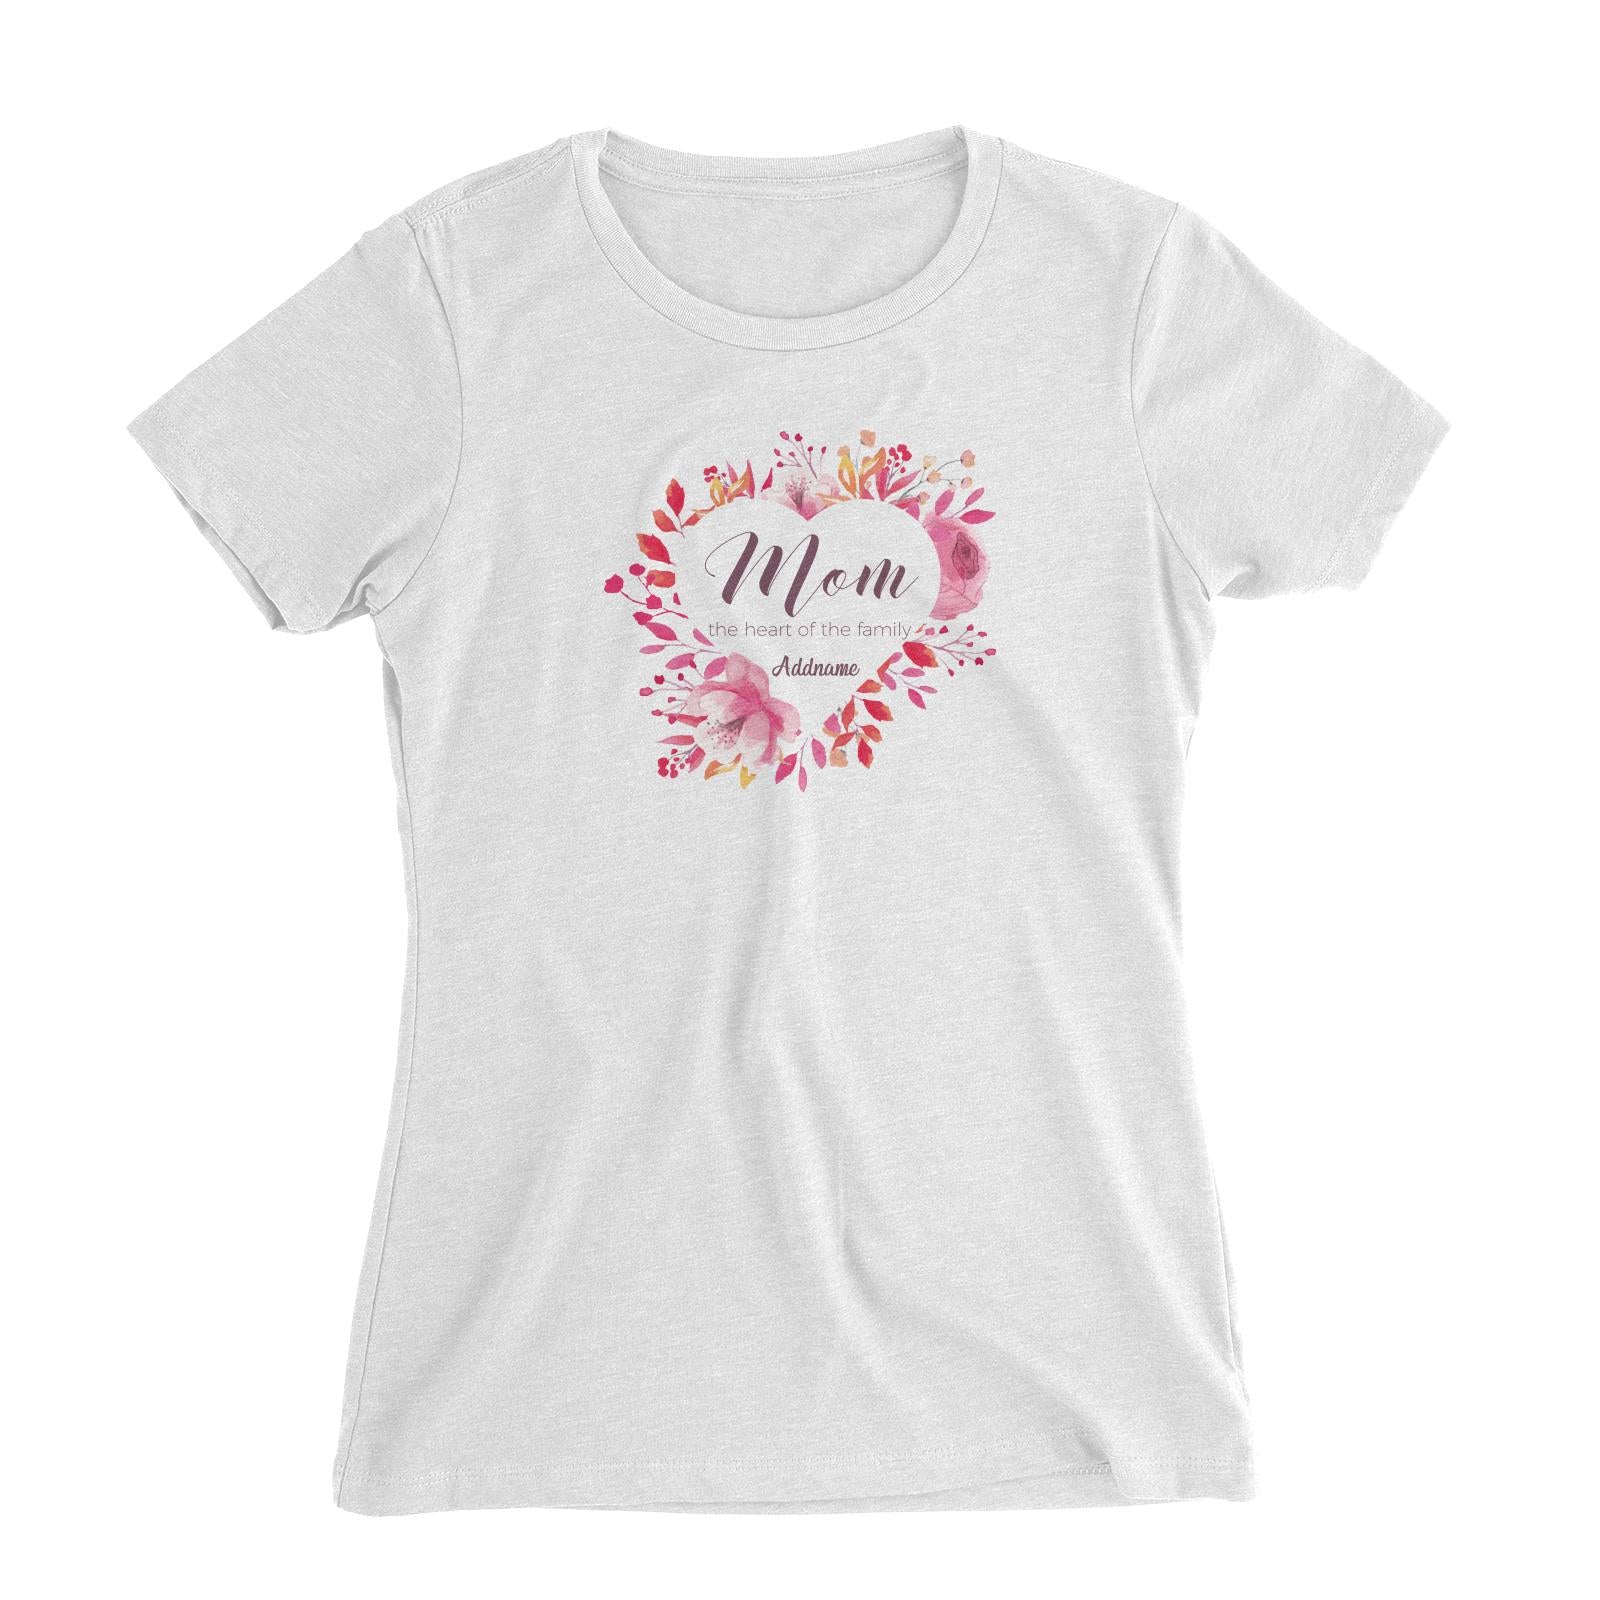 Sweet Mom Heart Mom The Heart of The Family Addname Women's Slim Fit T-Shirt